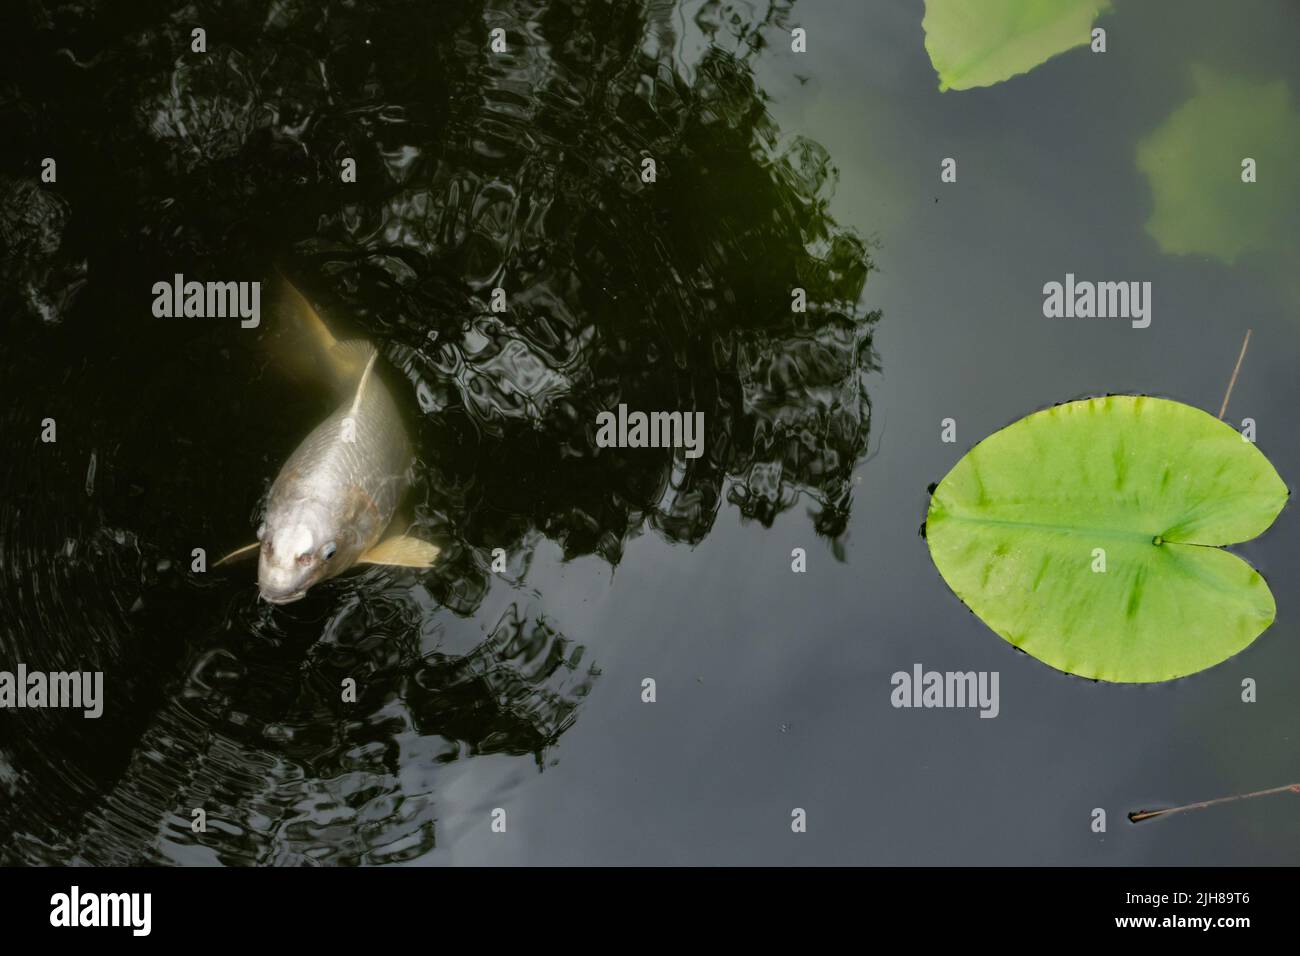 White carp fish swims on the surface of the lake next to the water lily leaves in Botanical garden Copenhagen, Denmark Stock Photo